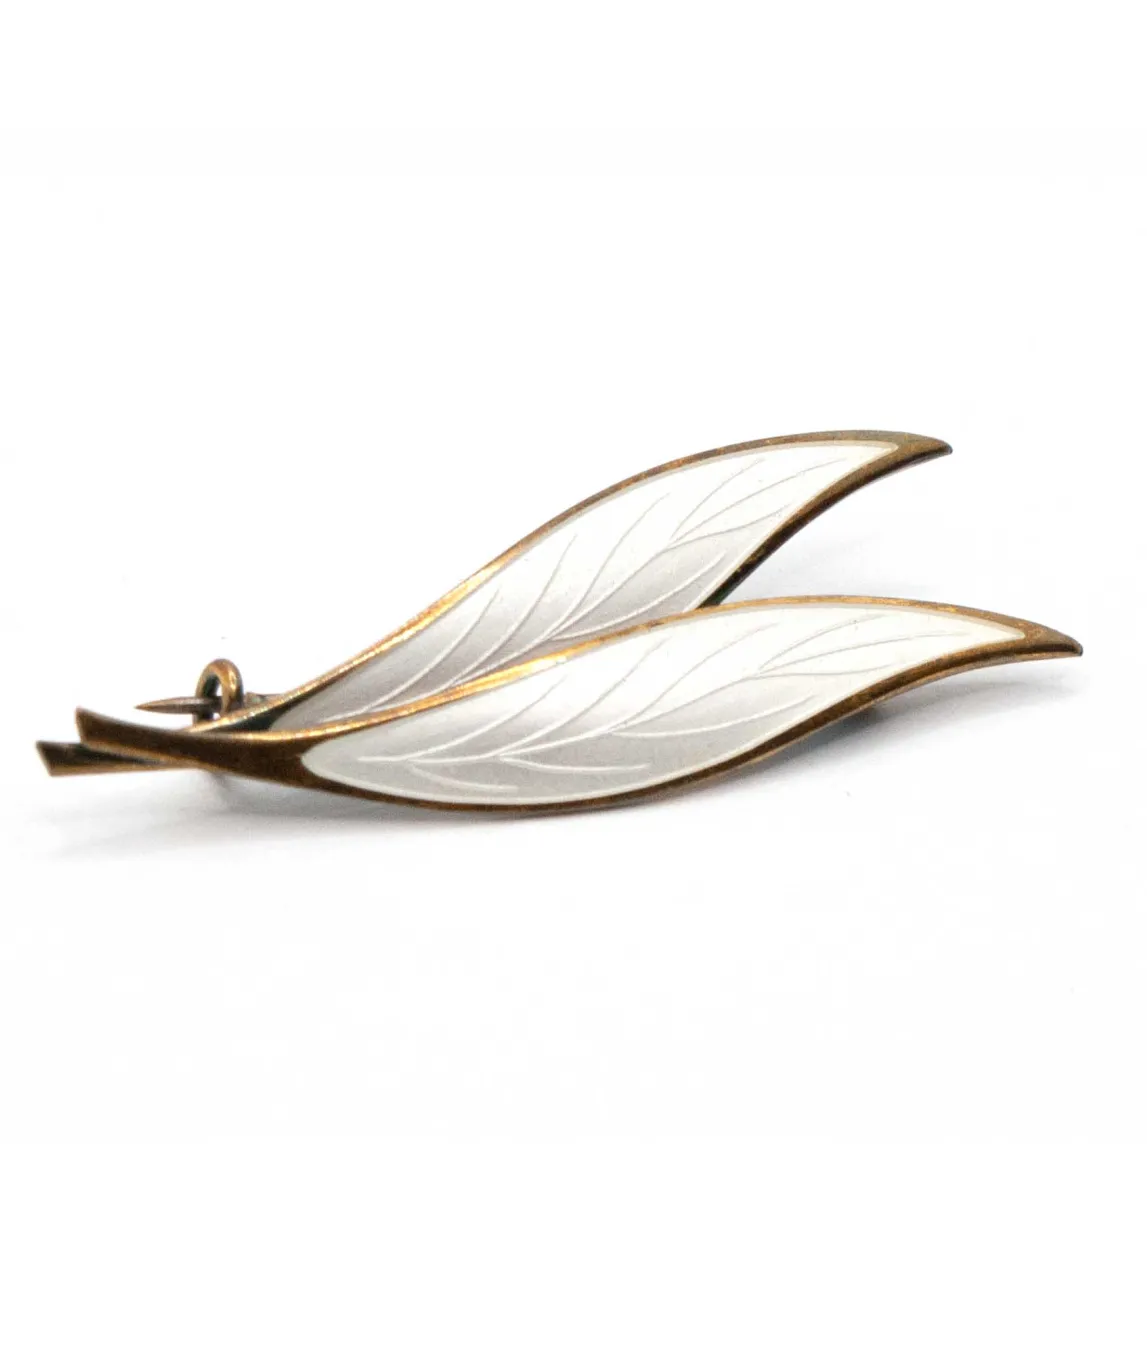 Double leaf brooch decorated with white enamel with a gold plated perimeter and stems